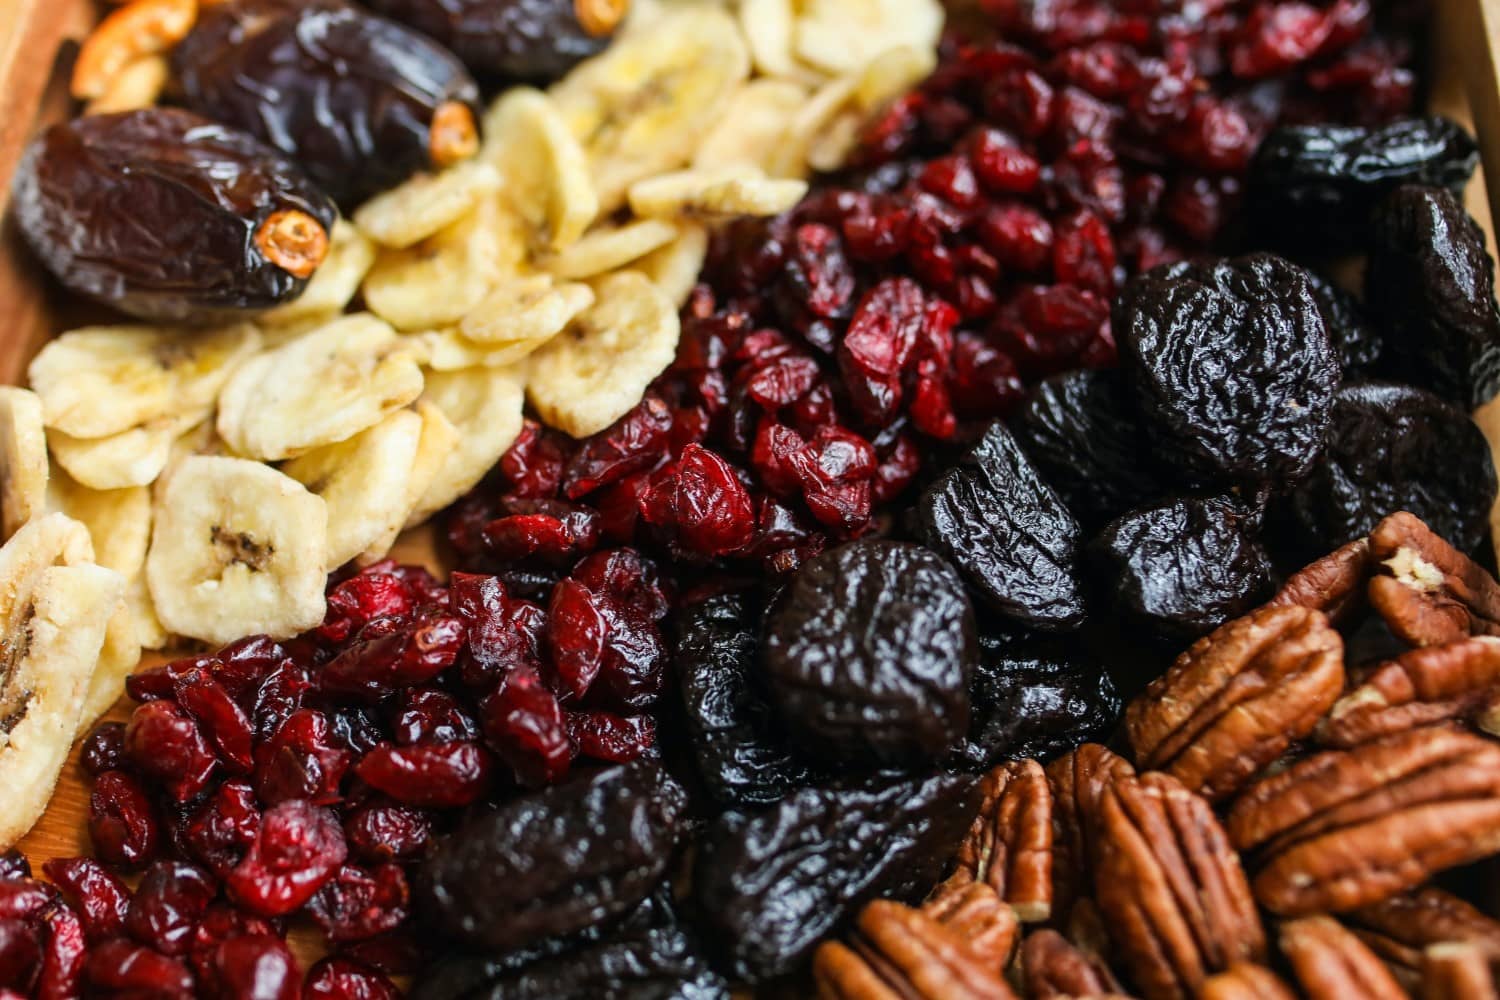 Dried fruits is one perfect match regarding Jack Daniels and Food pairing